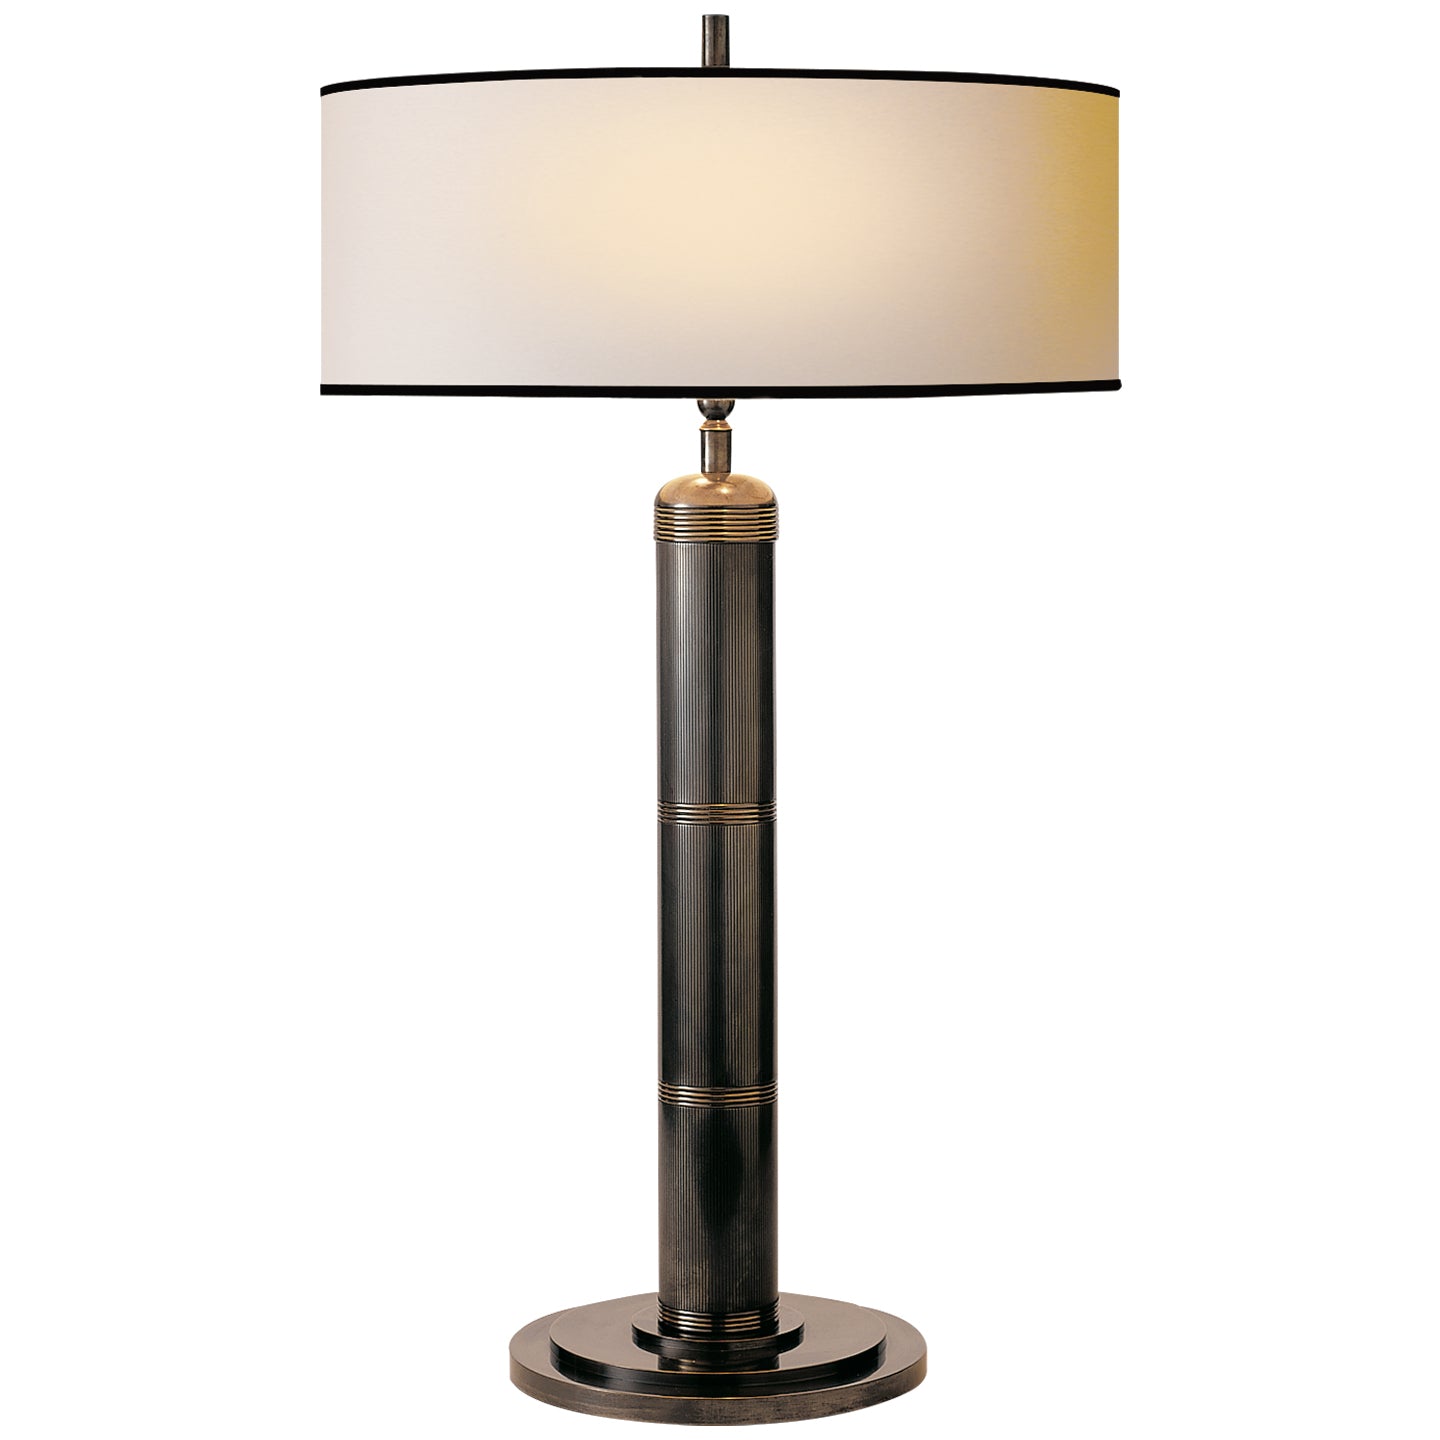  This high table lamp is a perfect decorative element to set up the ambiance. Amethyst Home provides interior design services, furniture, rugs, and lighting in the Des Moines metro area.